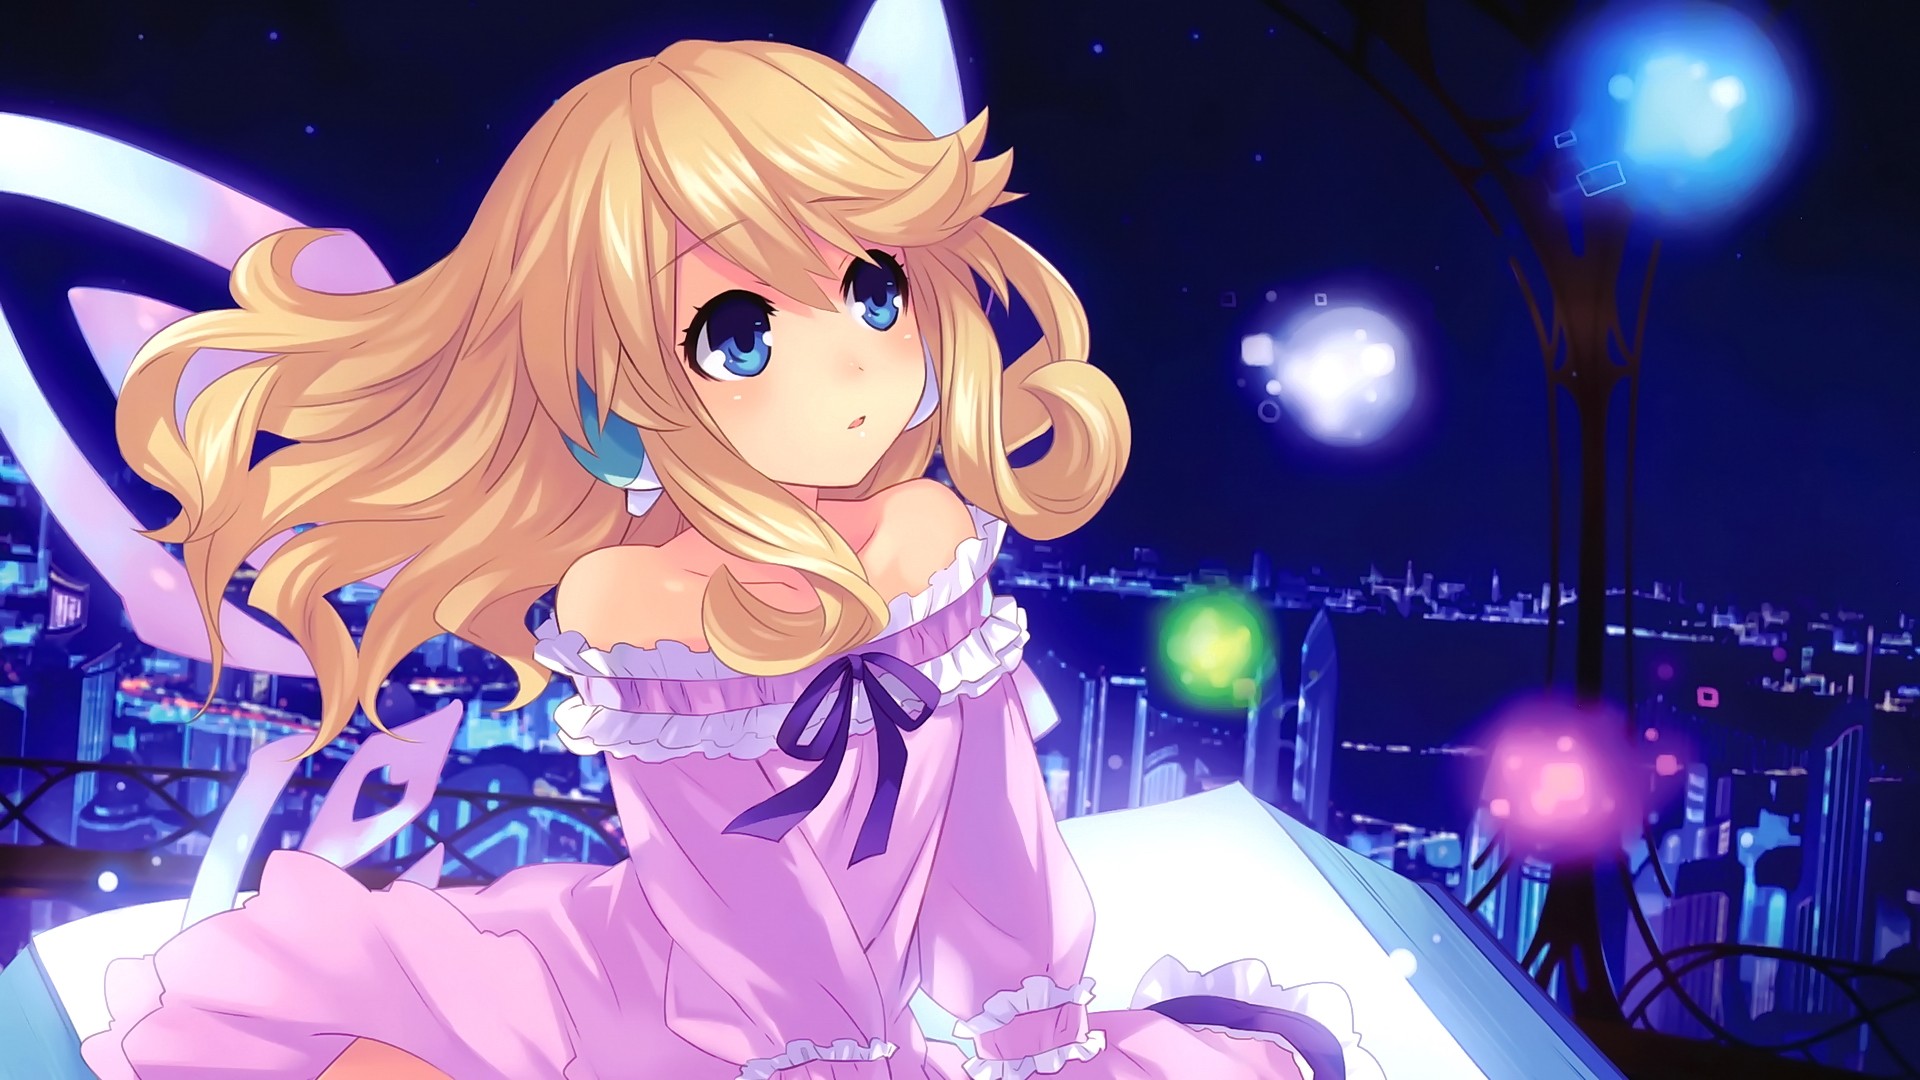 Anime 1920x1080 anime anime girls Hyperdimension Neptunia mk2 blonde blue eyes long hair open mouth city wings looking up pink dress pink clothing